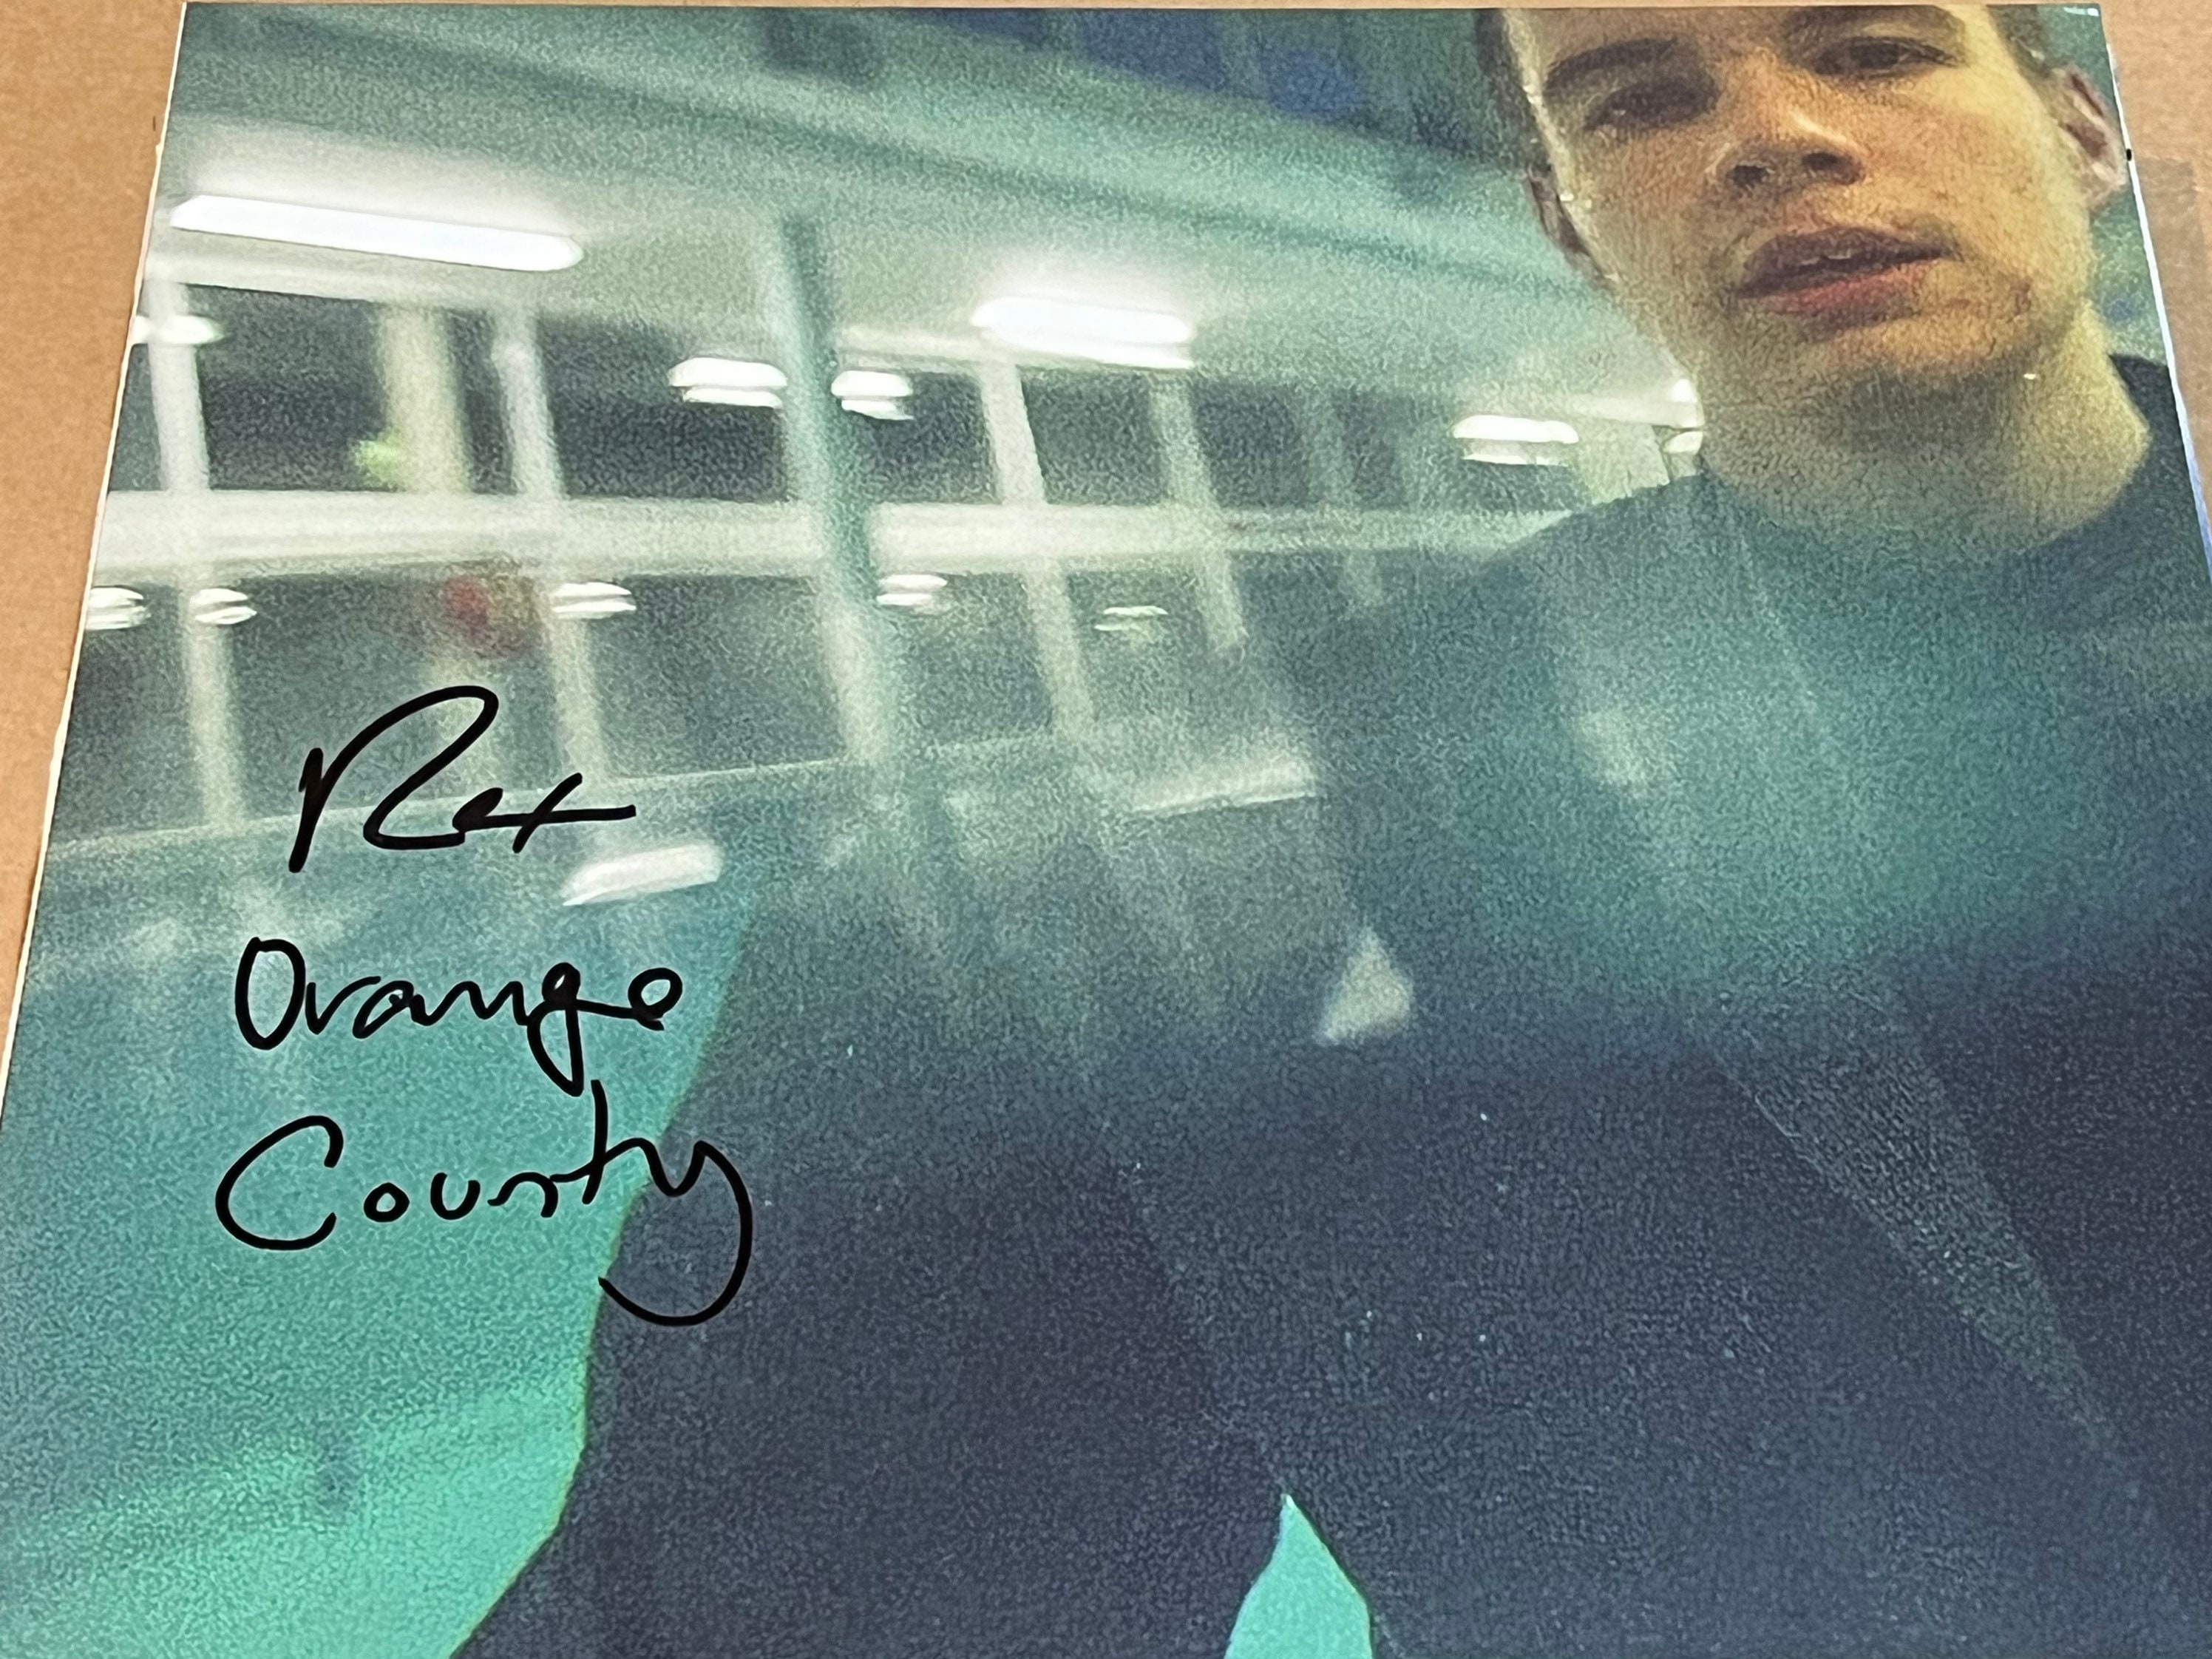 Rex Orange County-WHO CARES? CD (Autographed)